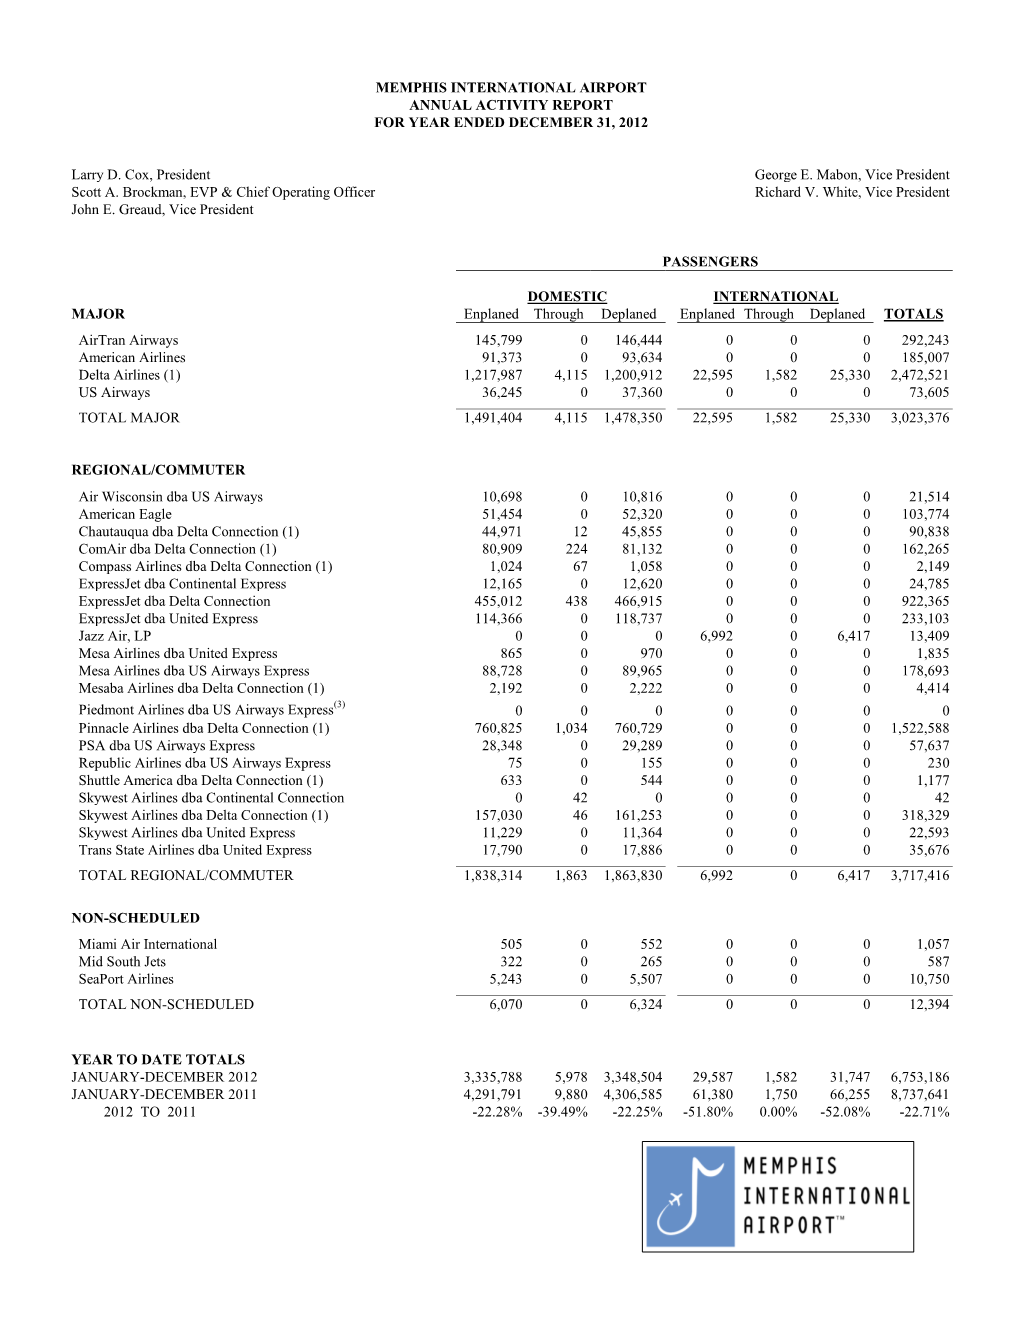 Memphis International Airport Annual Activity Report for Year Ended December 31, 2012